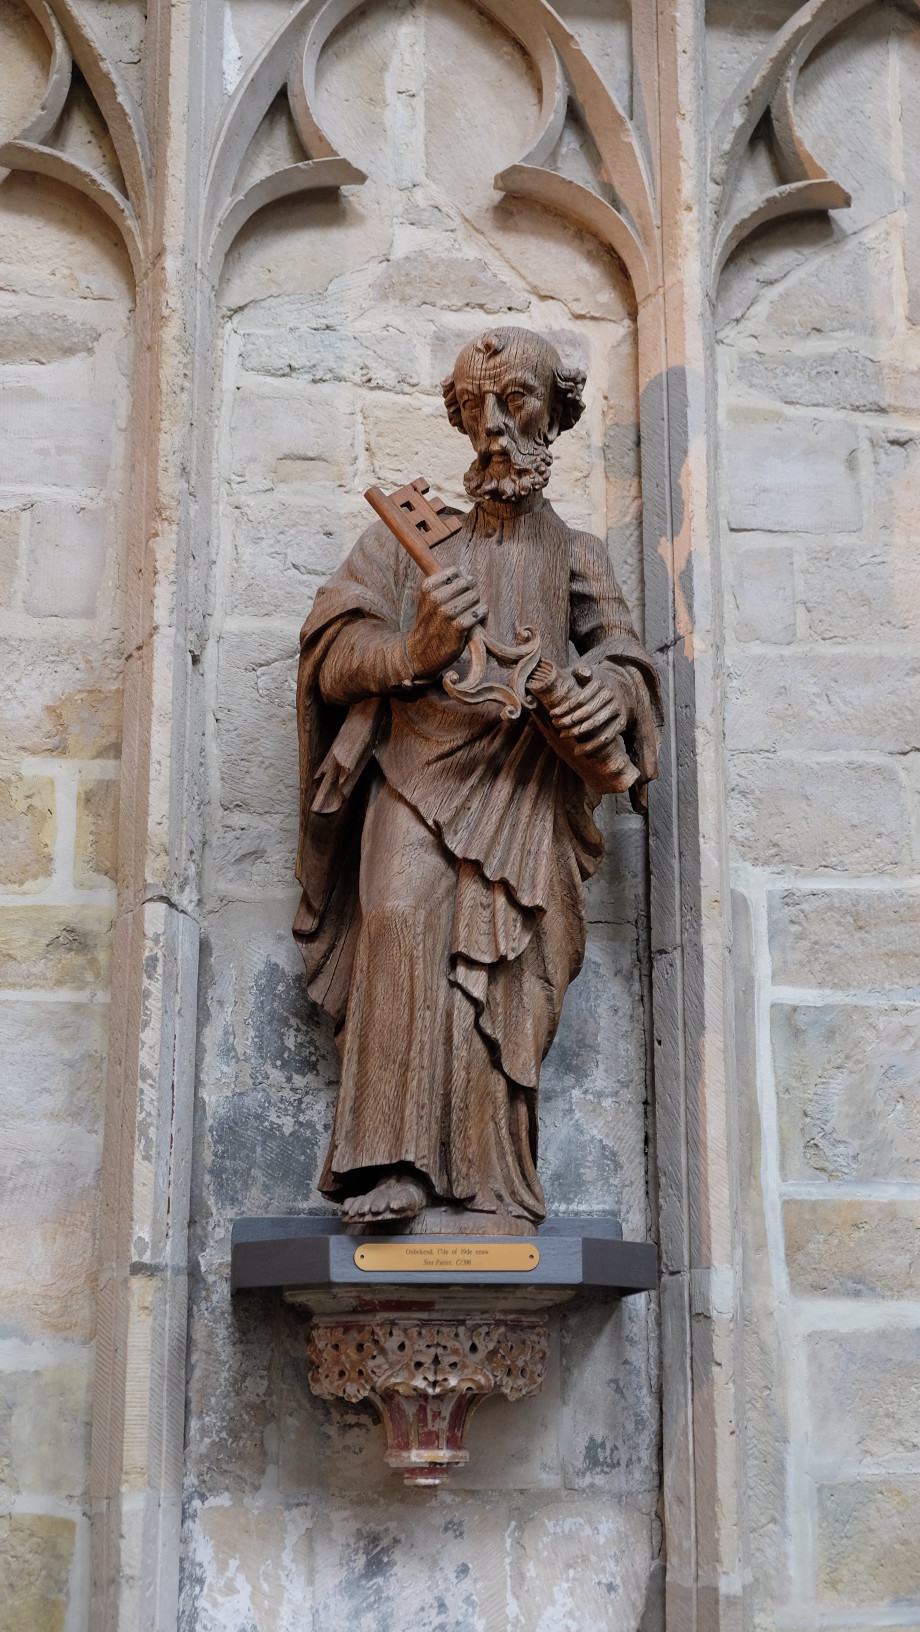 The wooden statue of St. Peter in St. Peter's church, Leuven, Belgium